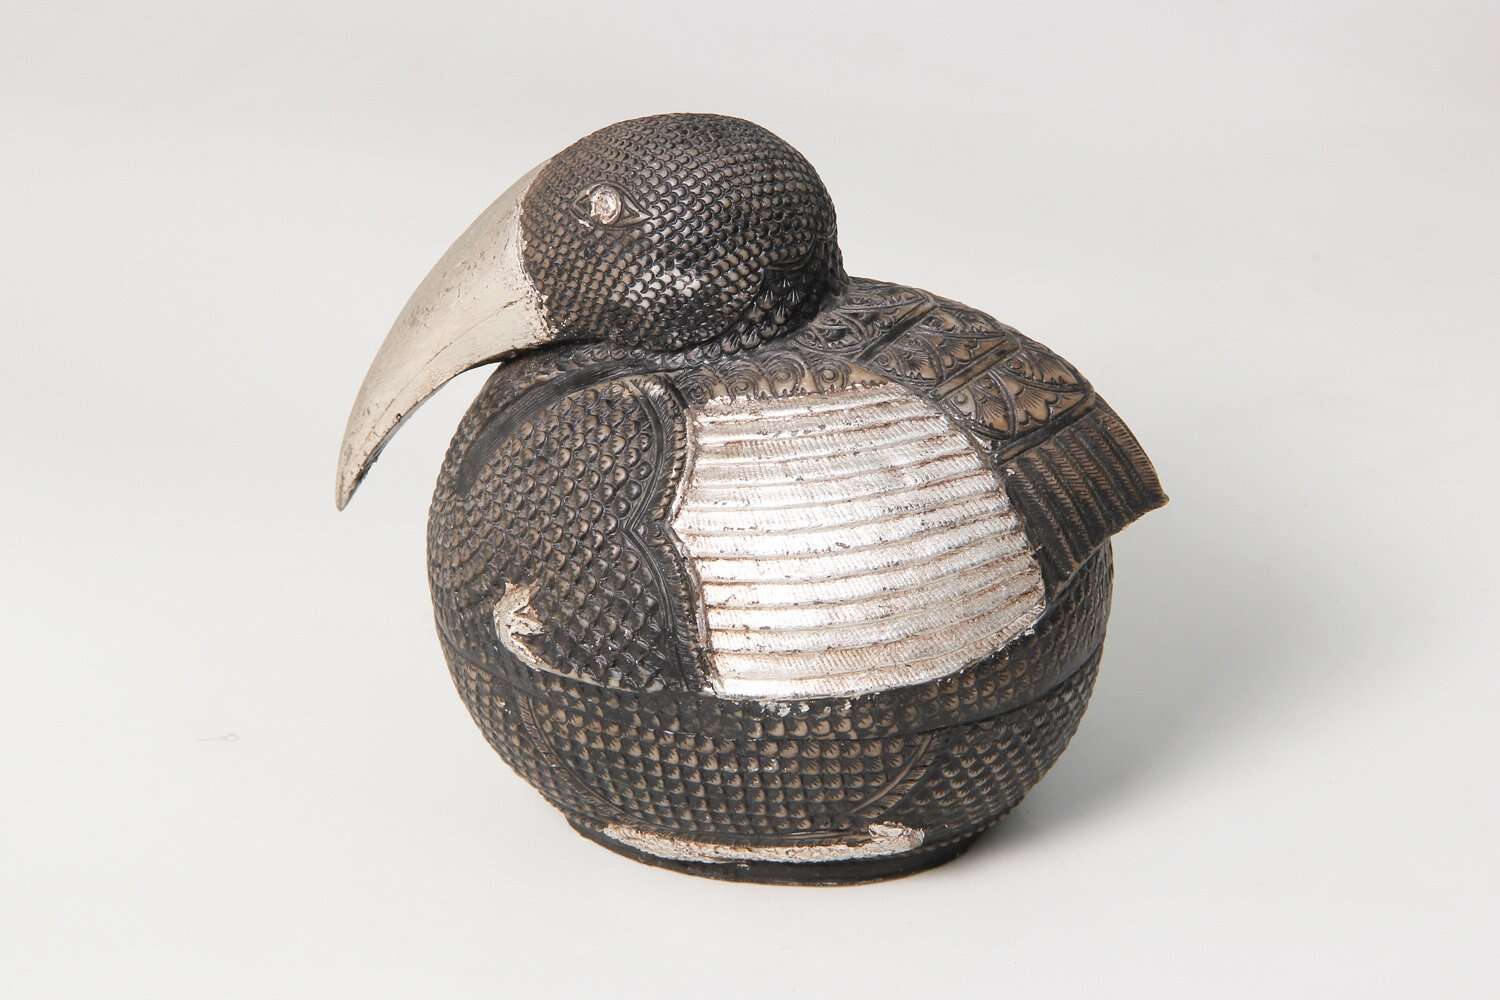 Charming small Silver pelican sculpture